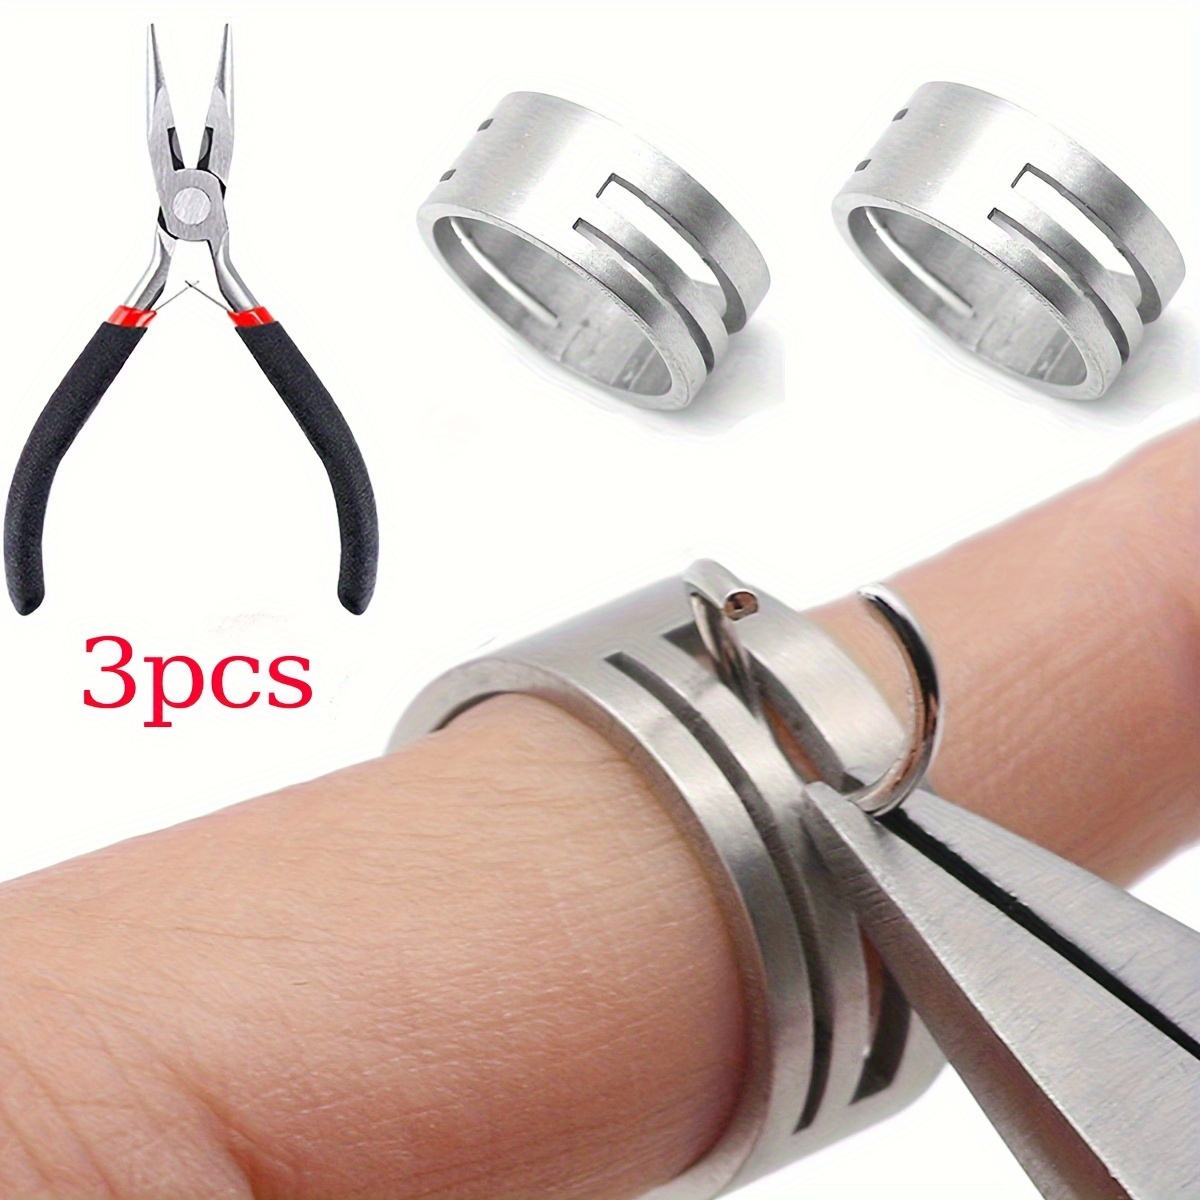 

Stainless Steel Jewelry Making Kit - 3pcs Ring Opening And Closing Tools With Needle-nose Pliers For Diy Jewelry Crafting - Durable, No Power Required